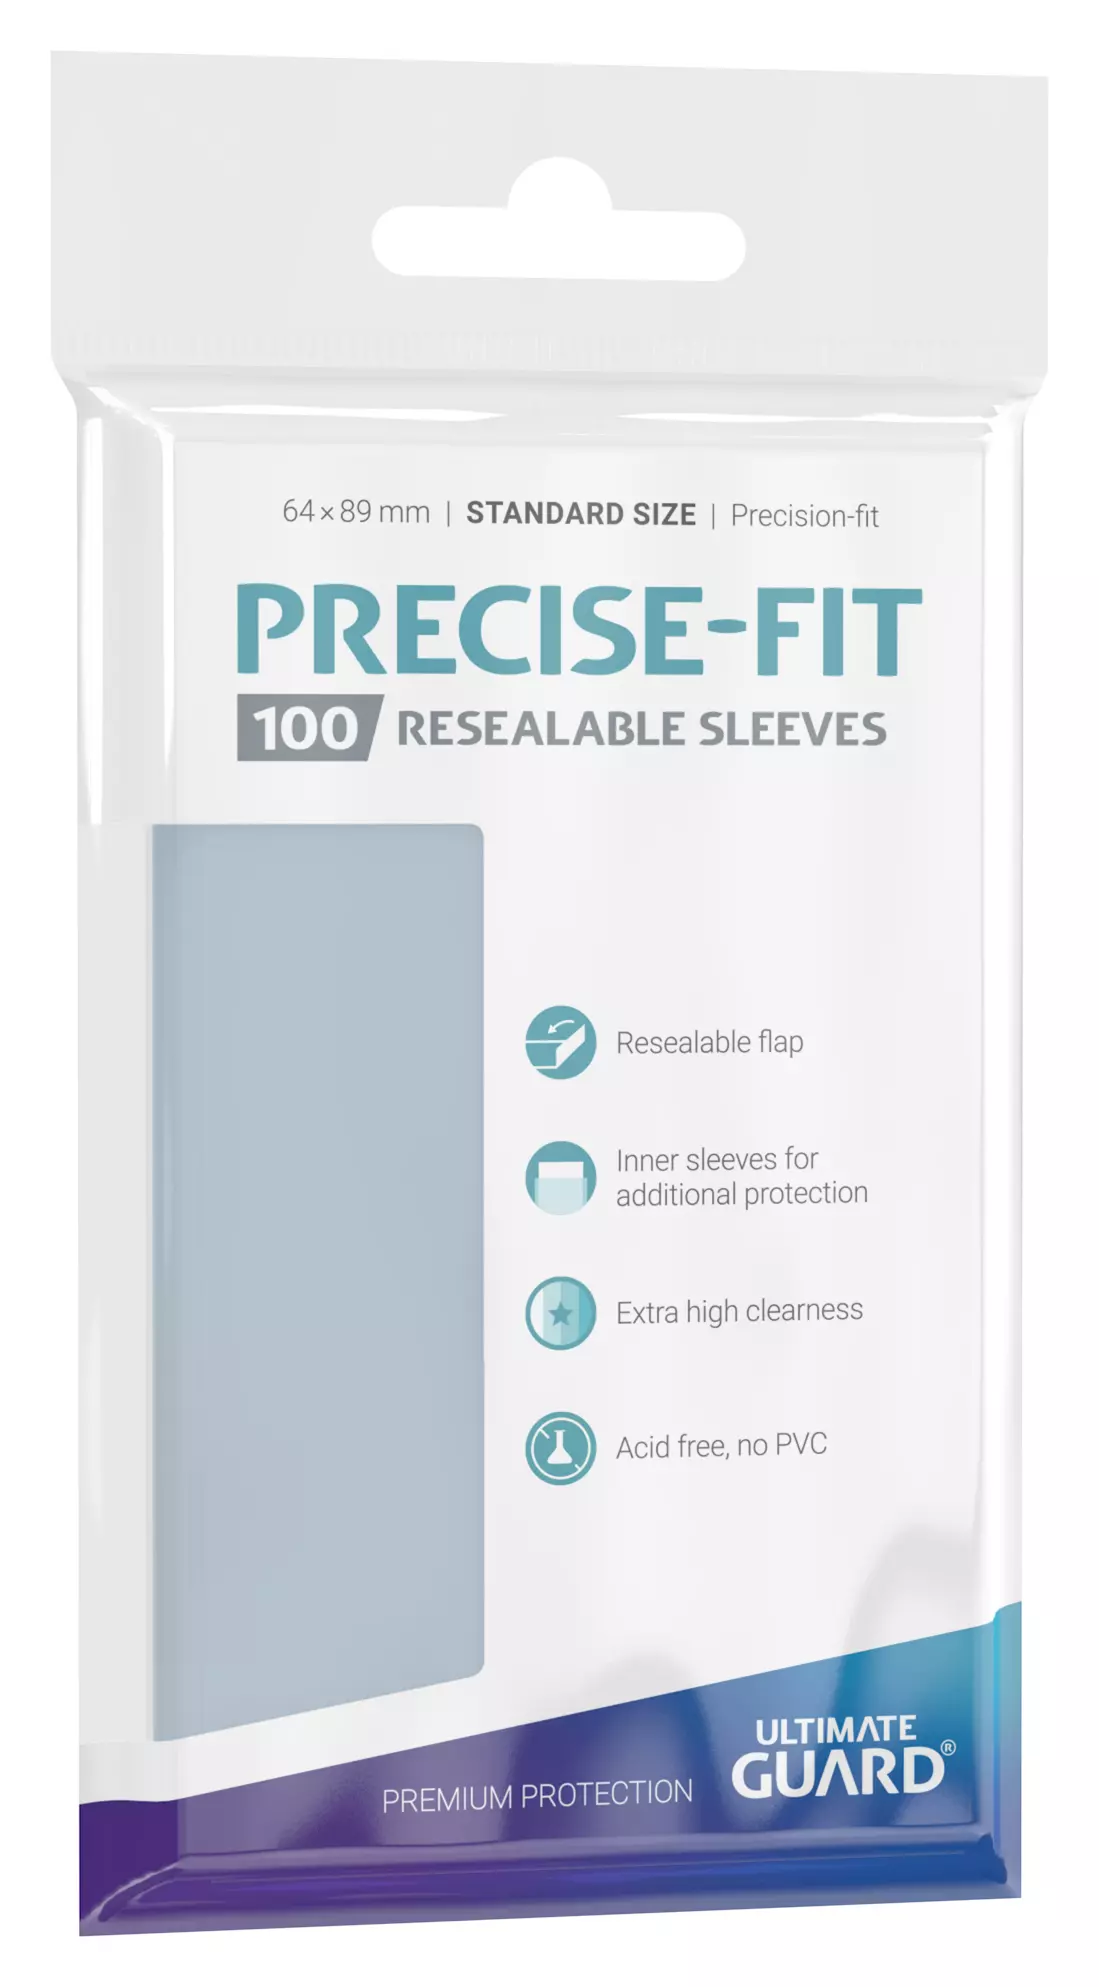 Precise-Fit Sleeves, Transparent, 100, Standard